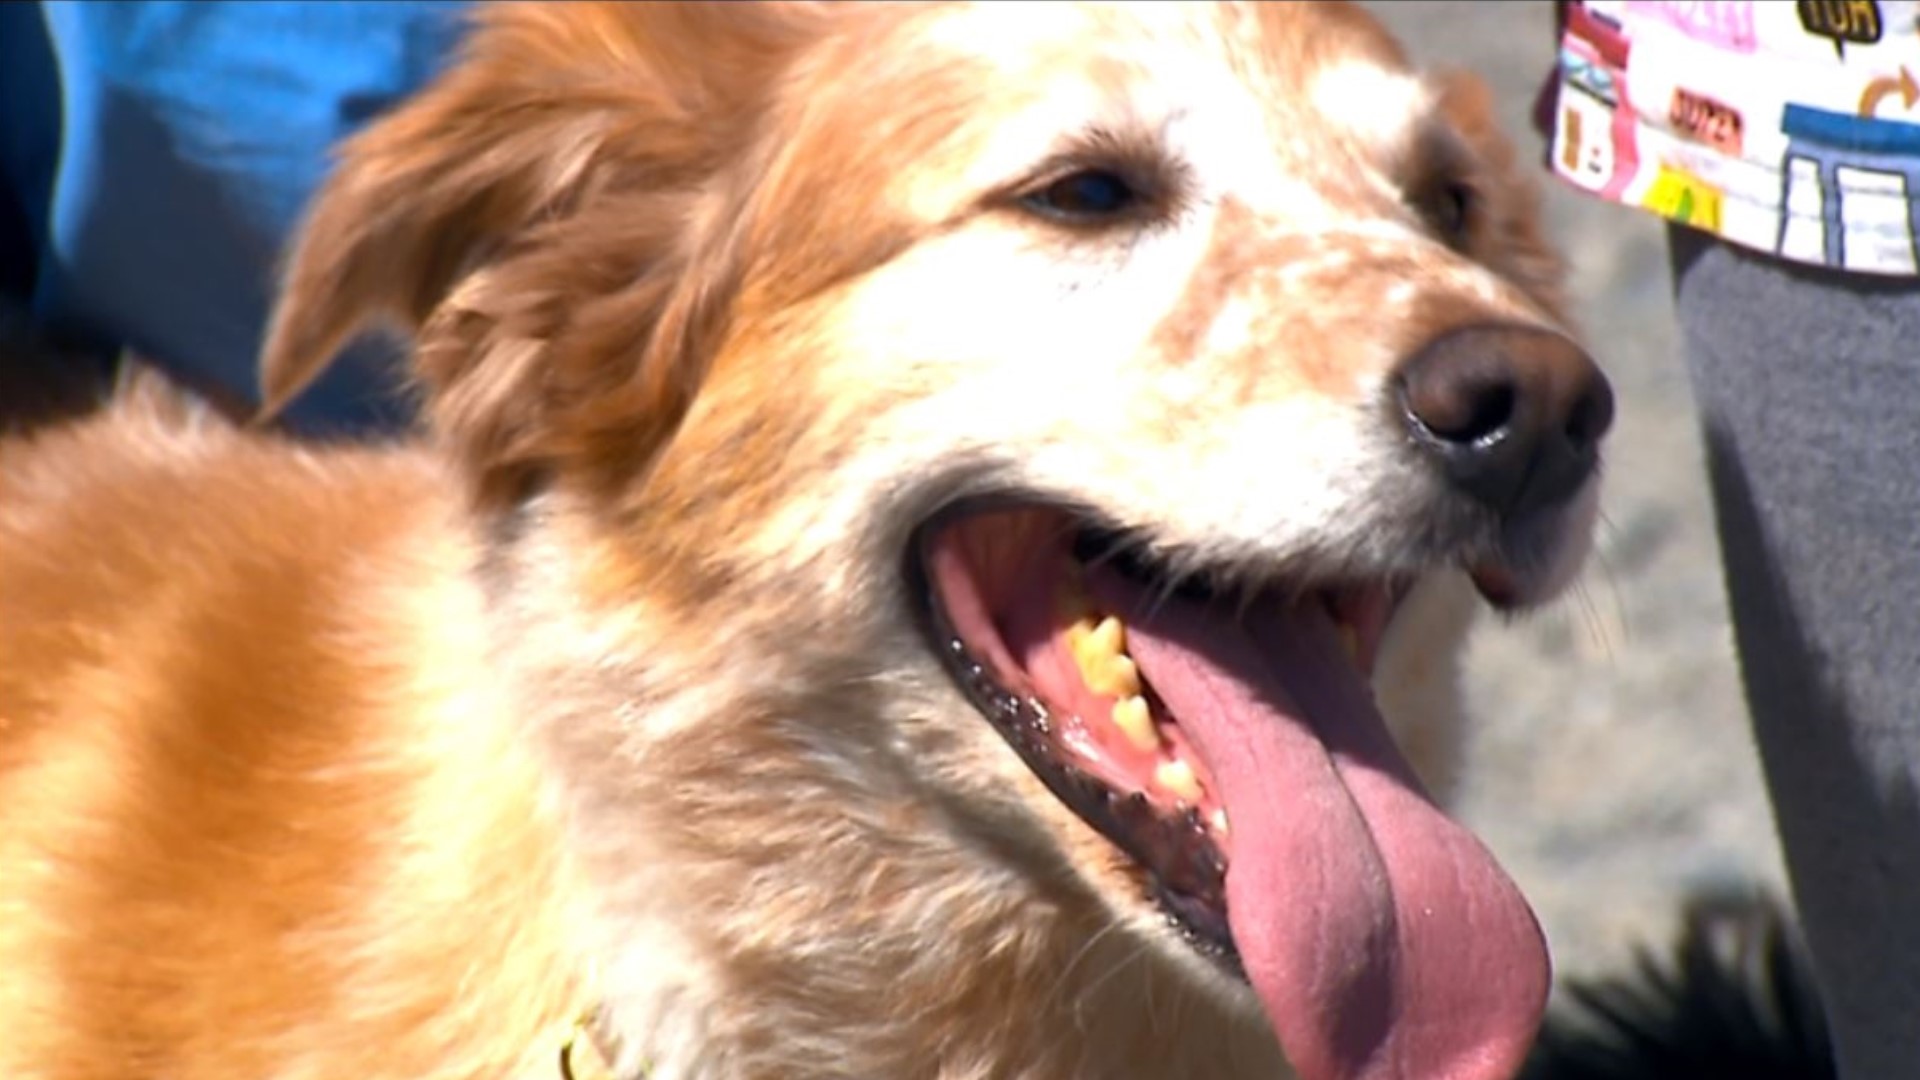 From walking to diving to drinking "beer," there are lots of options for fun with furry friends in the Puget Sound. #k5evening